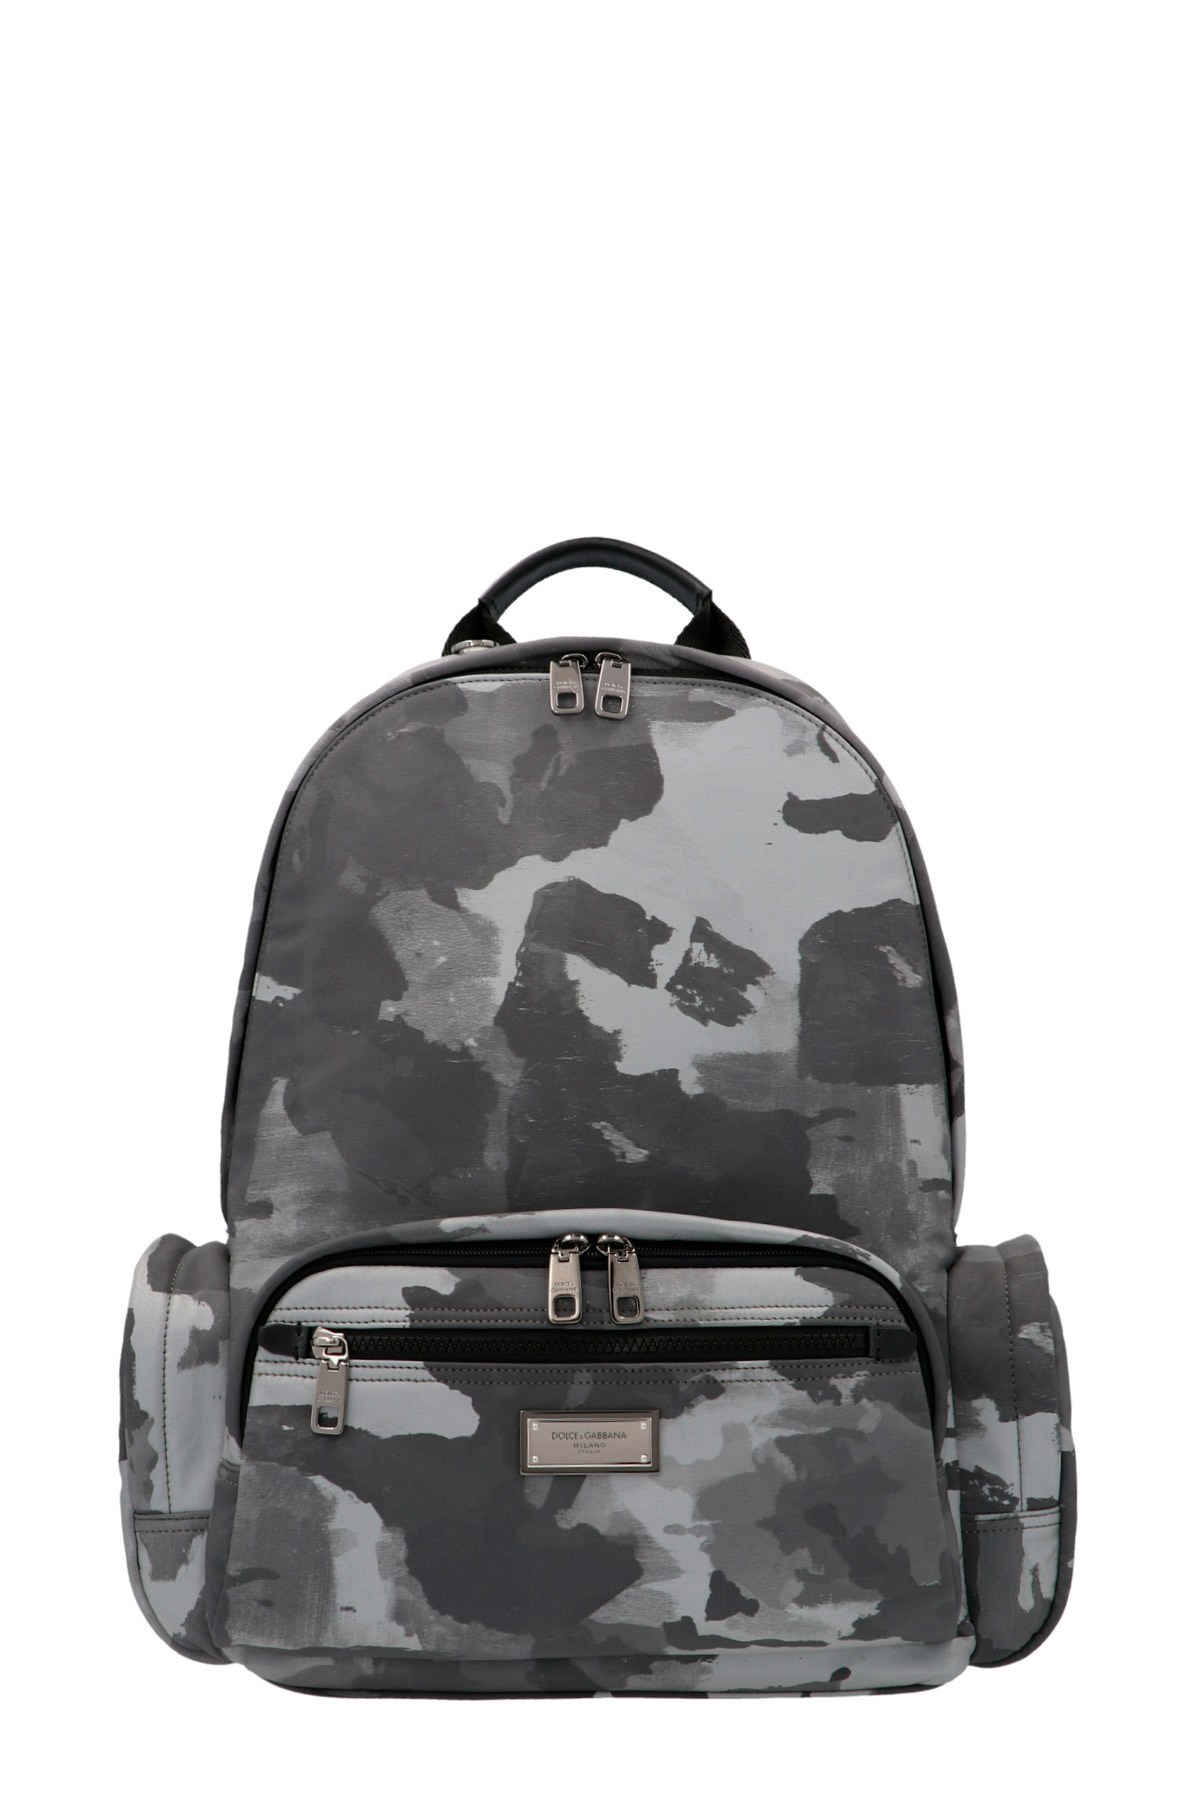 DOLCE & GABBANA Camouflage Backpack